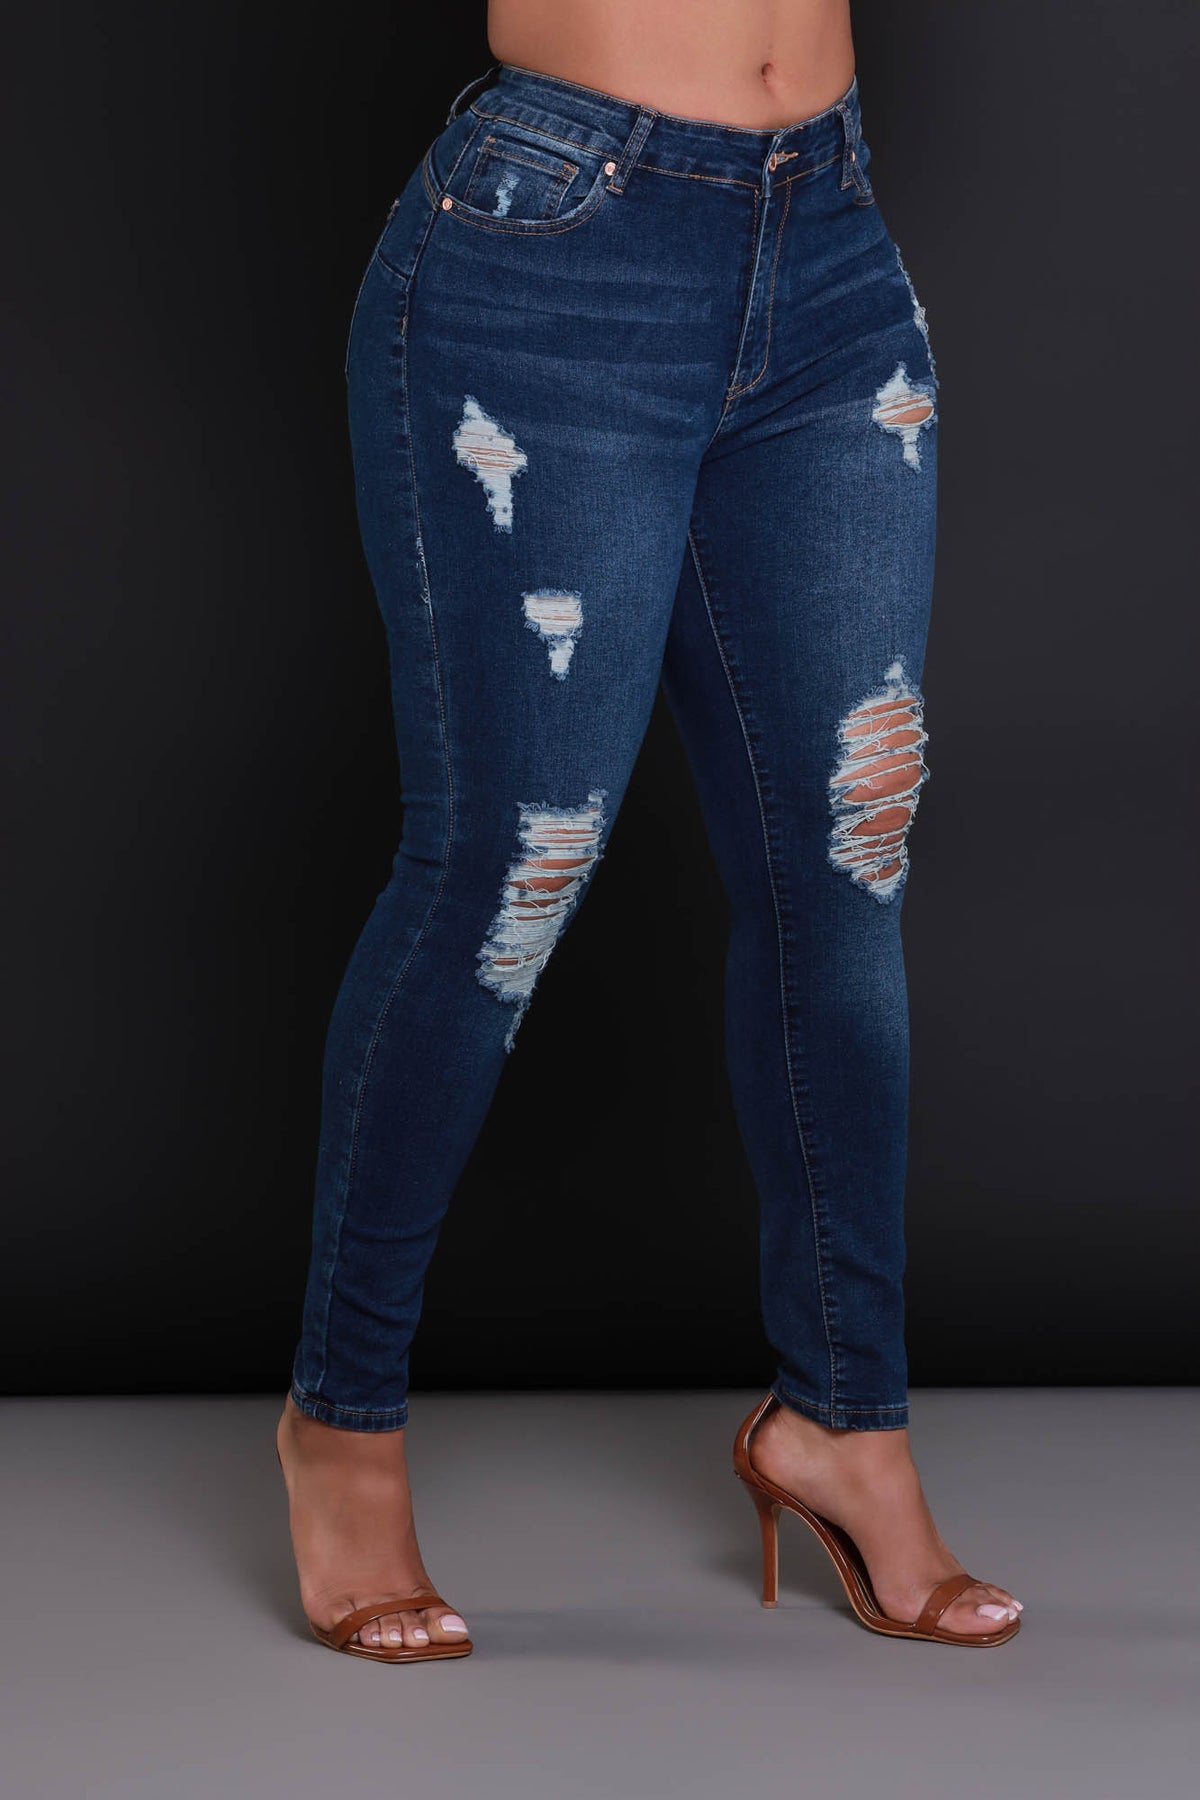 
              Heads Or Tails Hourglass Distressed Stretchy Jeans - Dark Wash - Swank A Posh
            